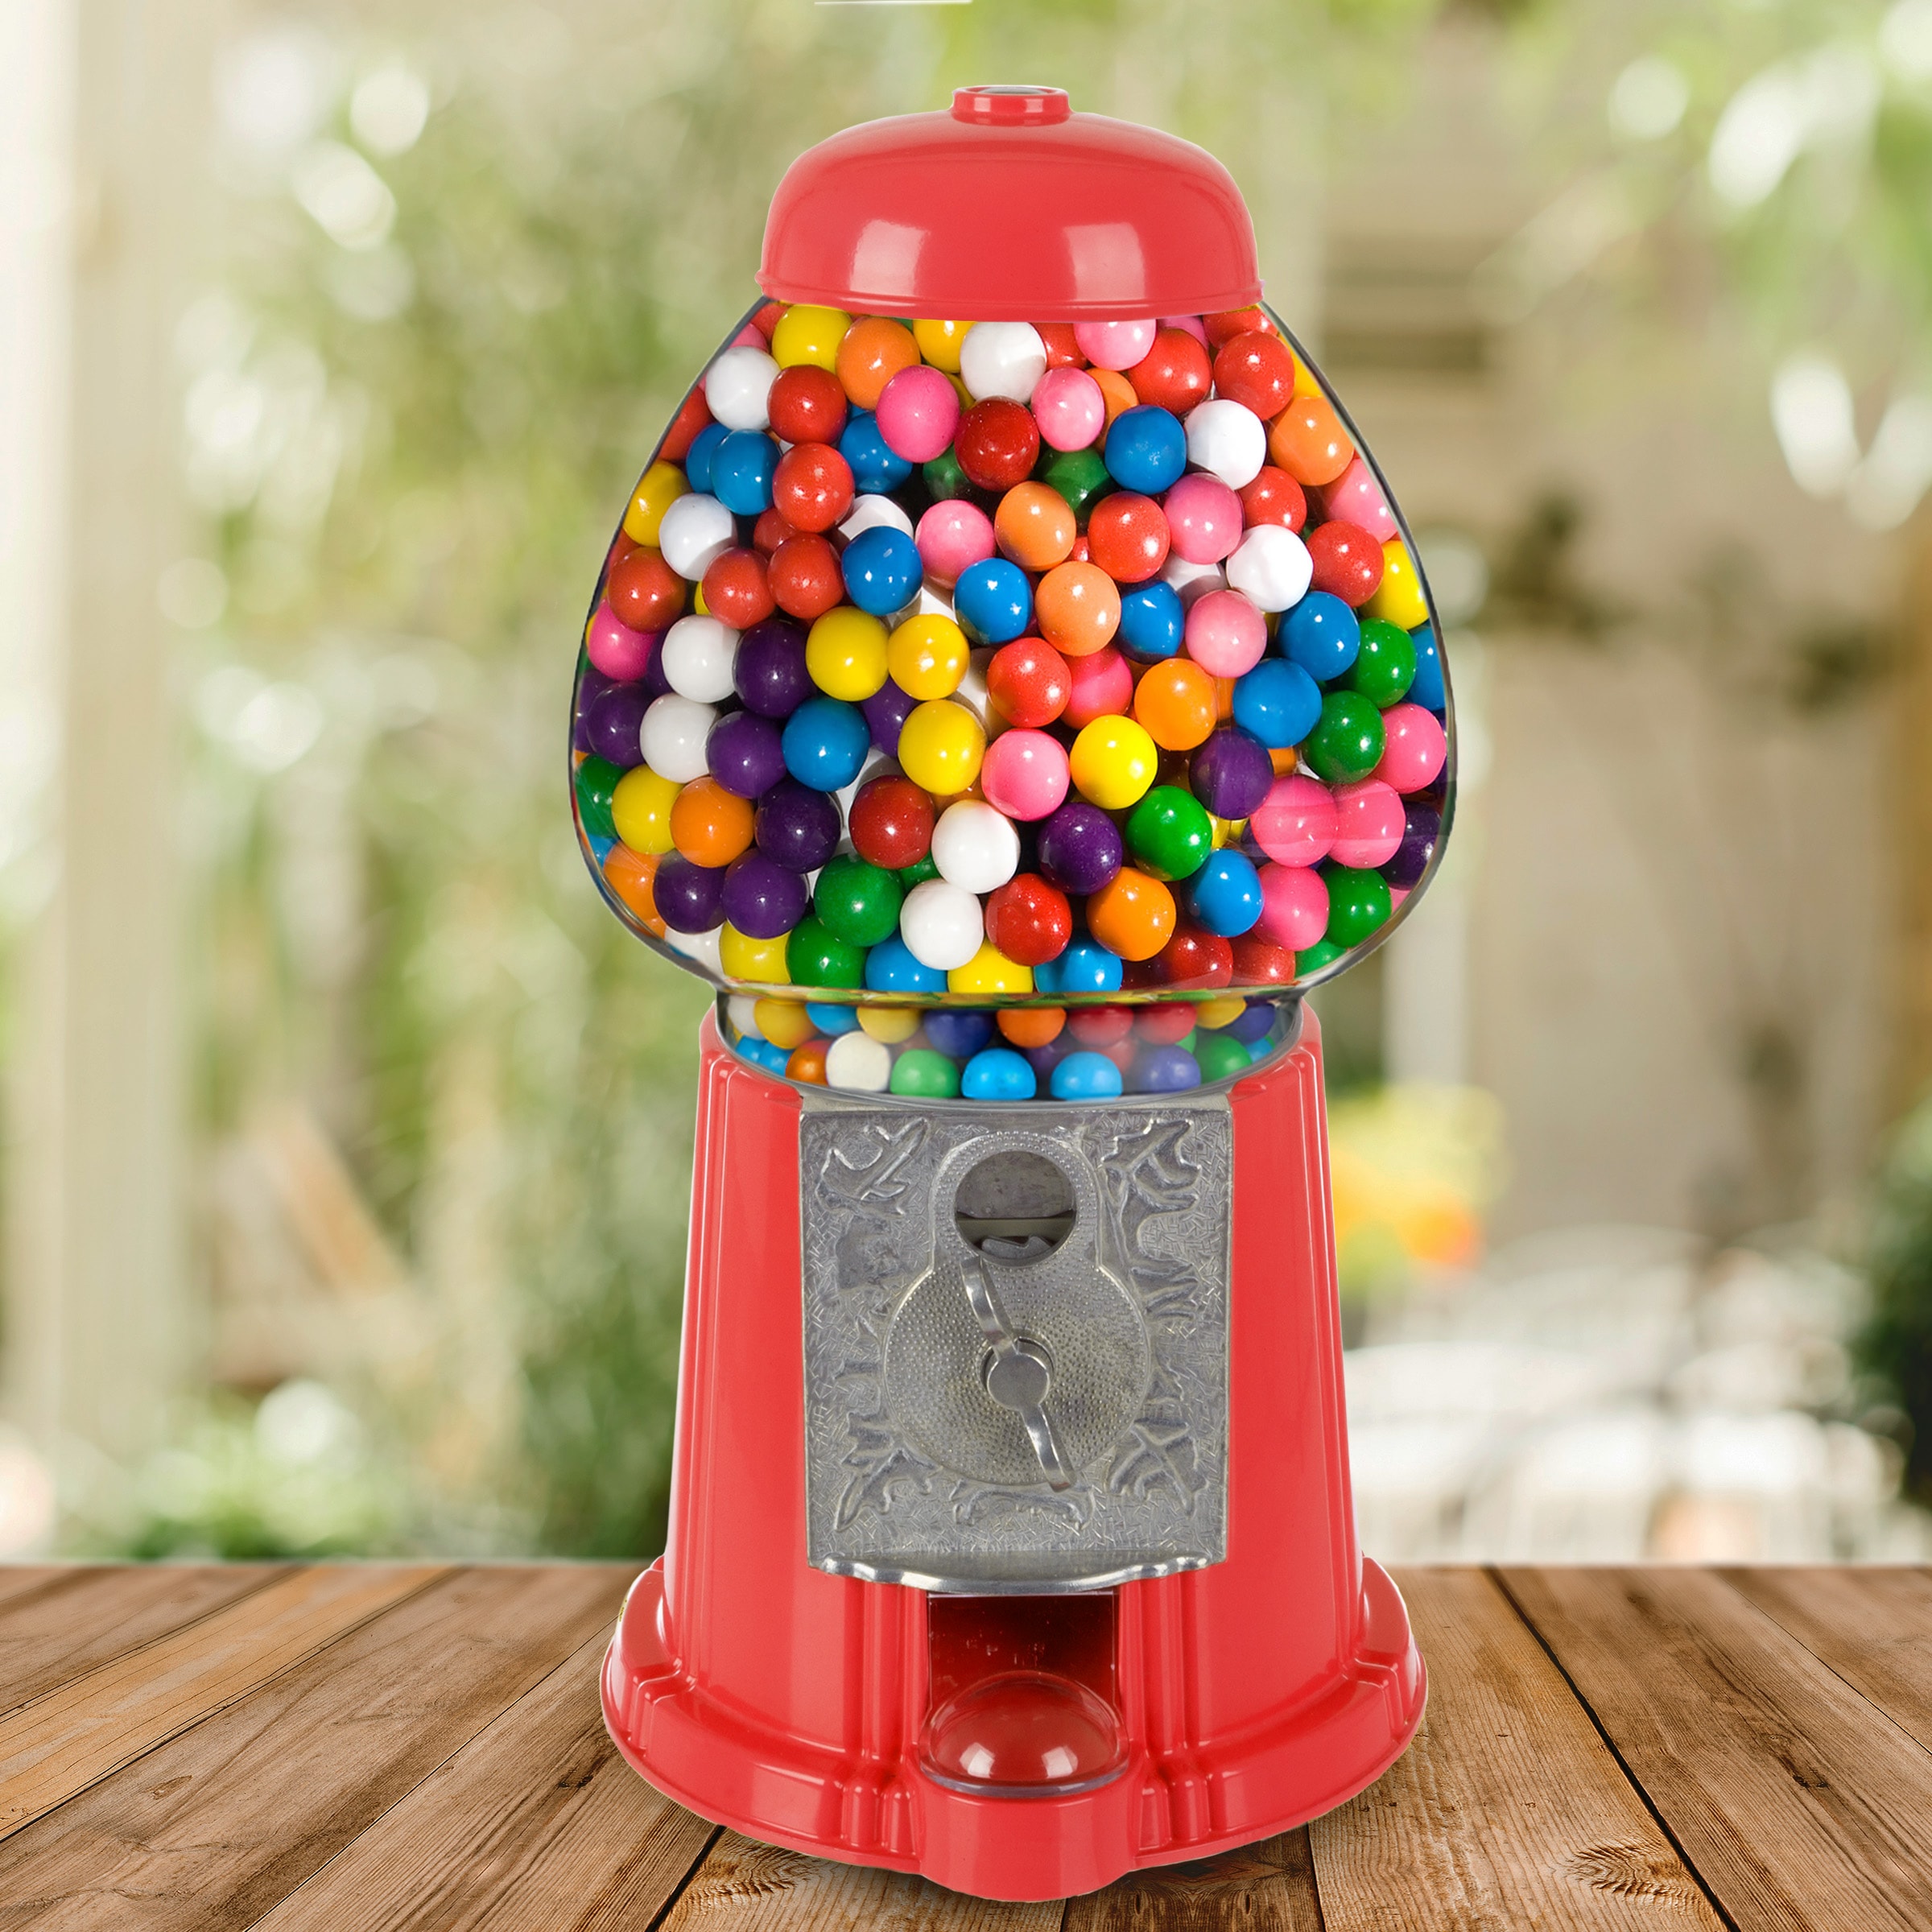 Get your candy fix and more with this old fashioned gumball